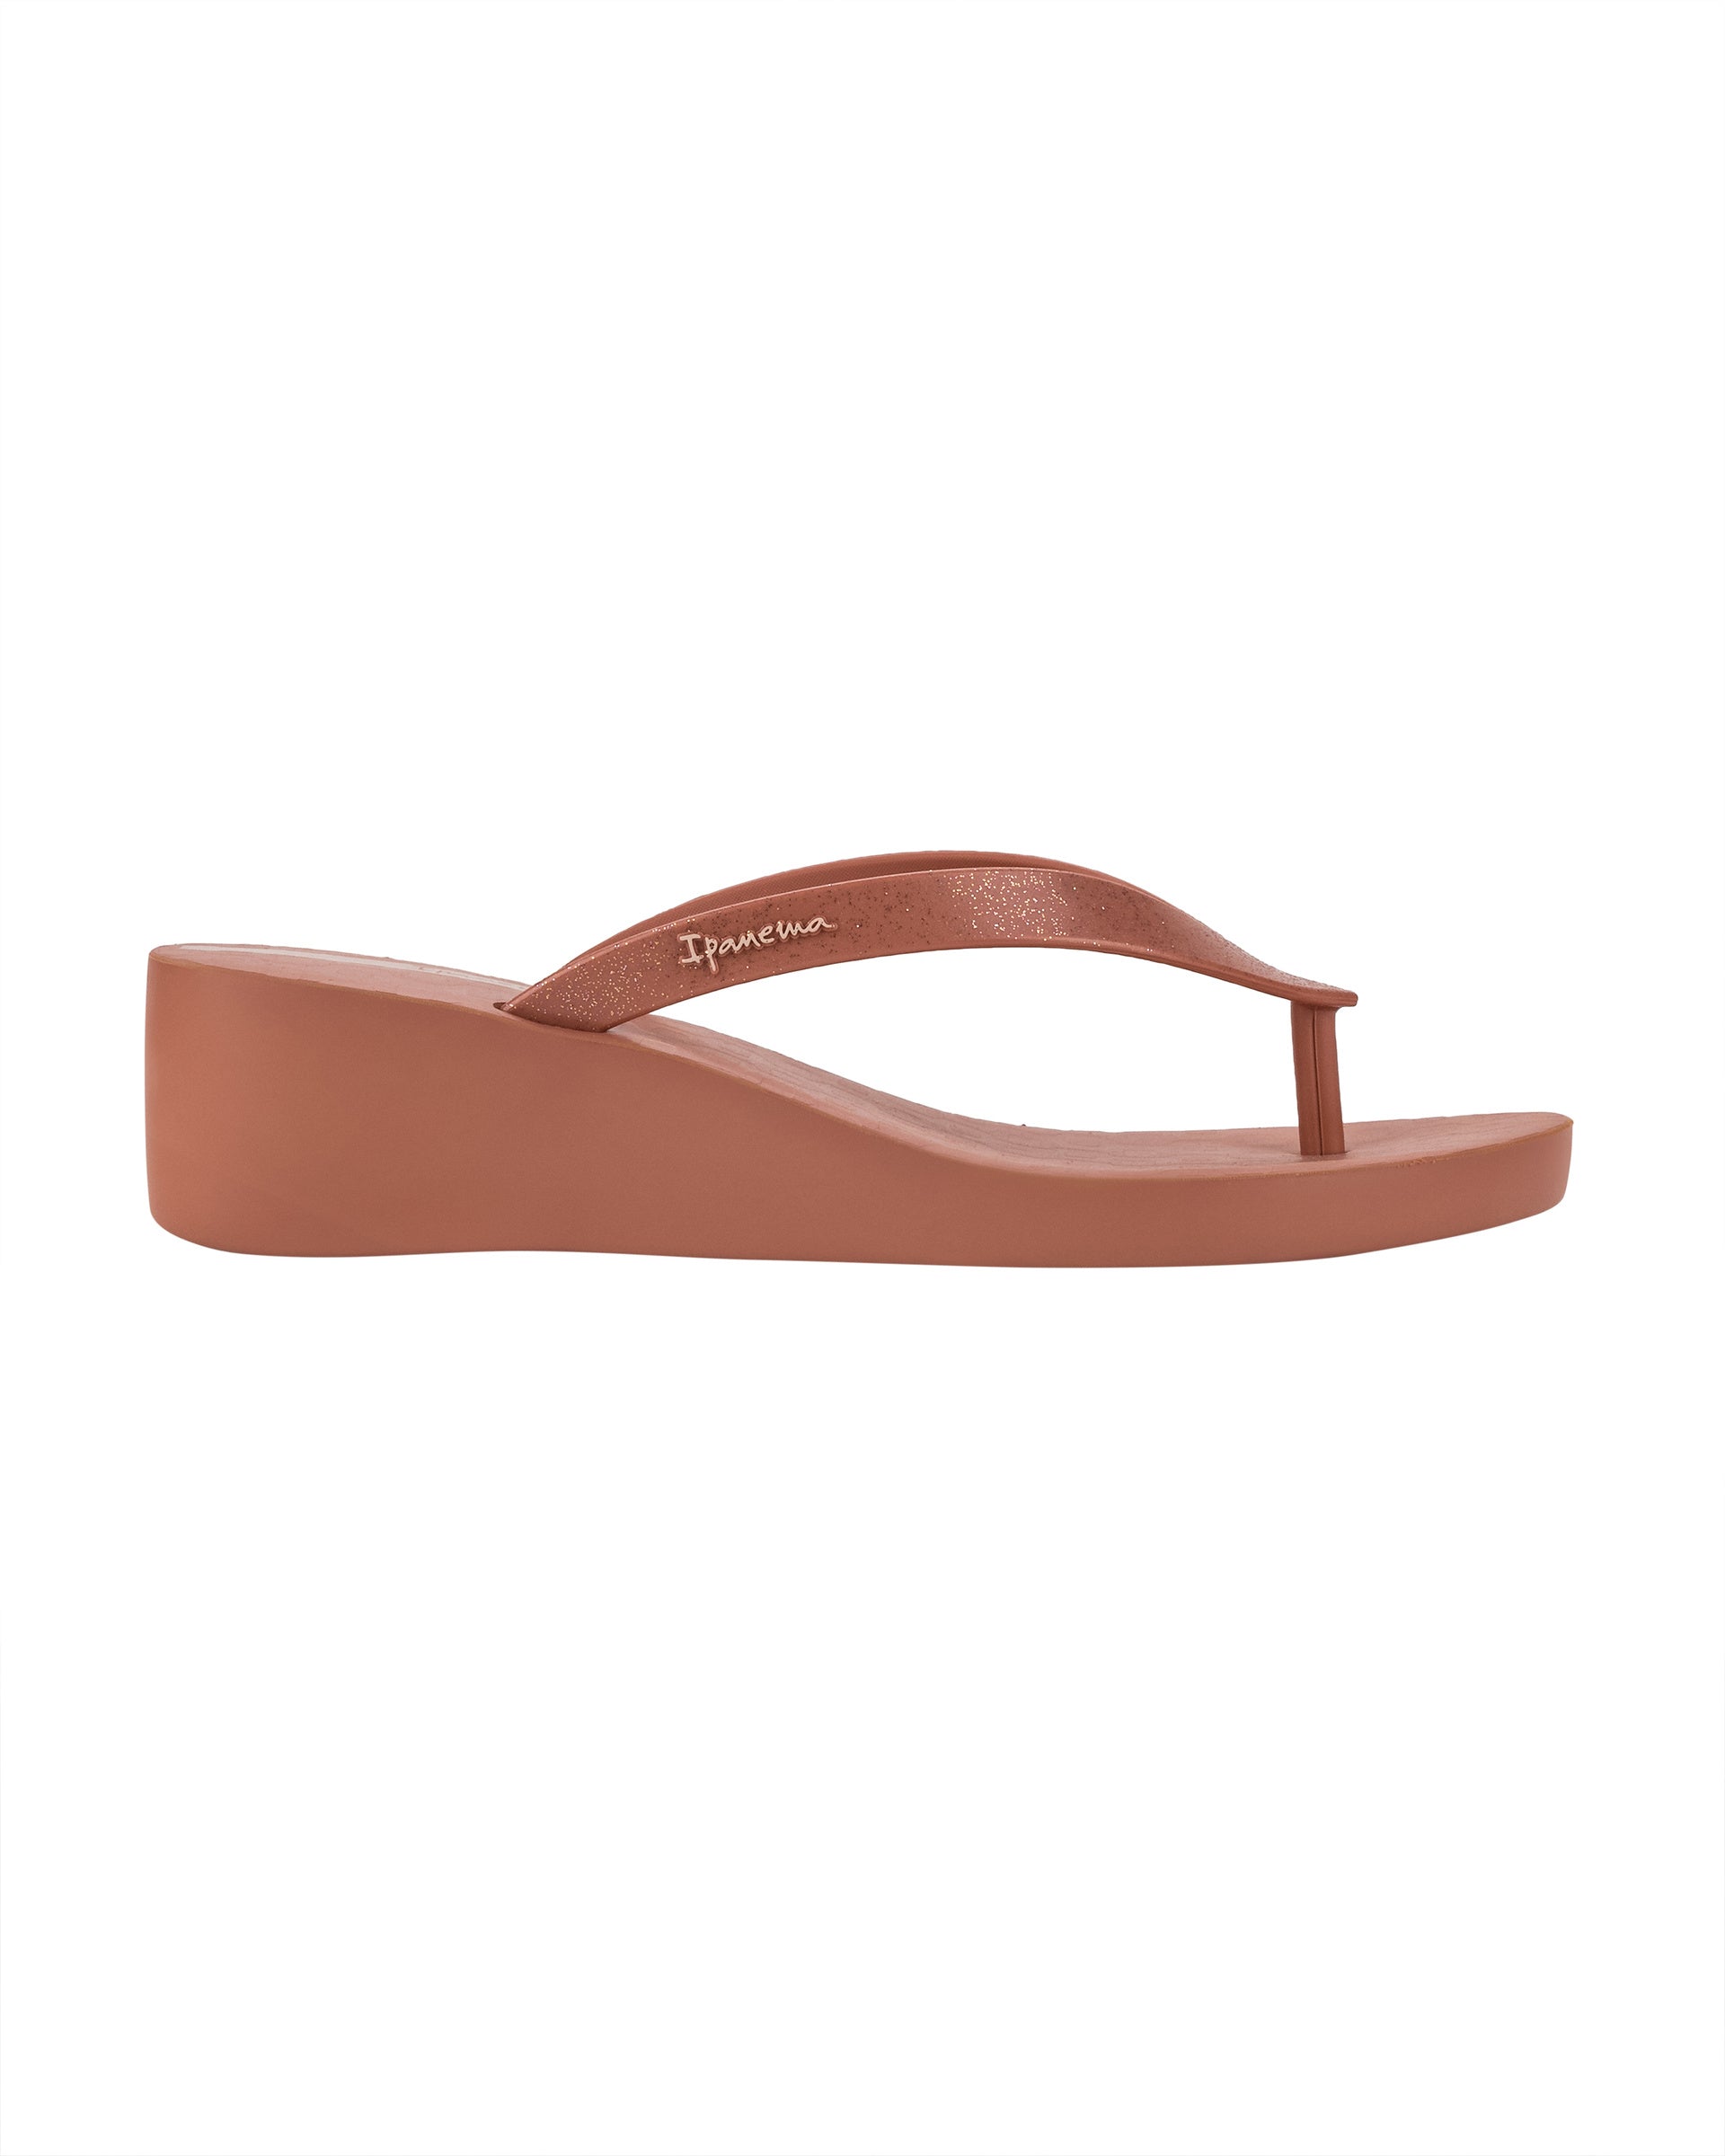 Outer side view of a pink Ipanema Selfie women's wedge flip flop with glitter pink straps.